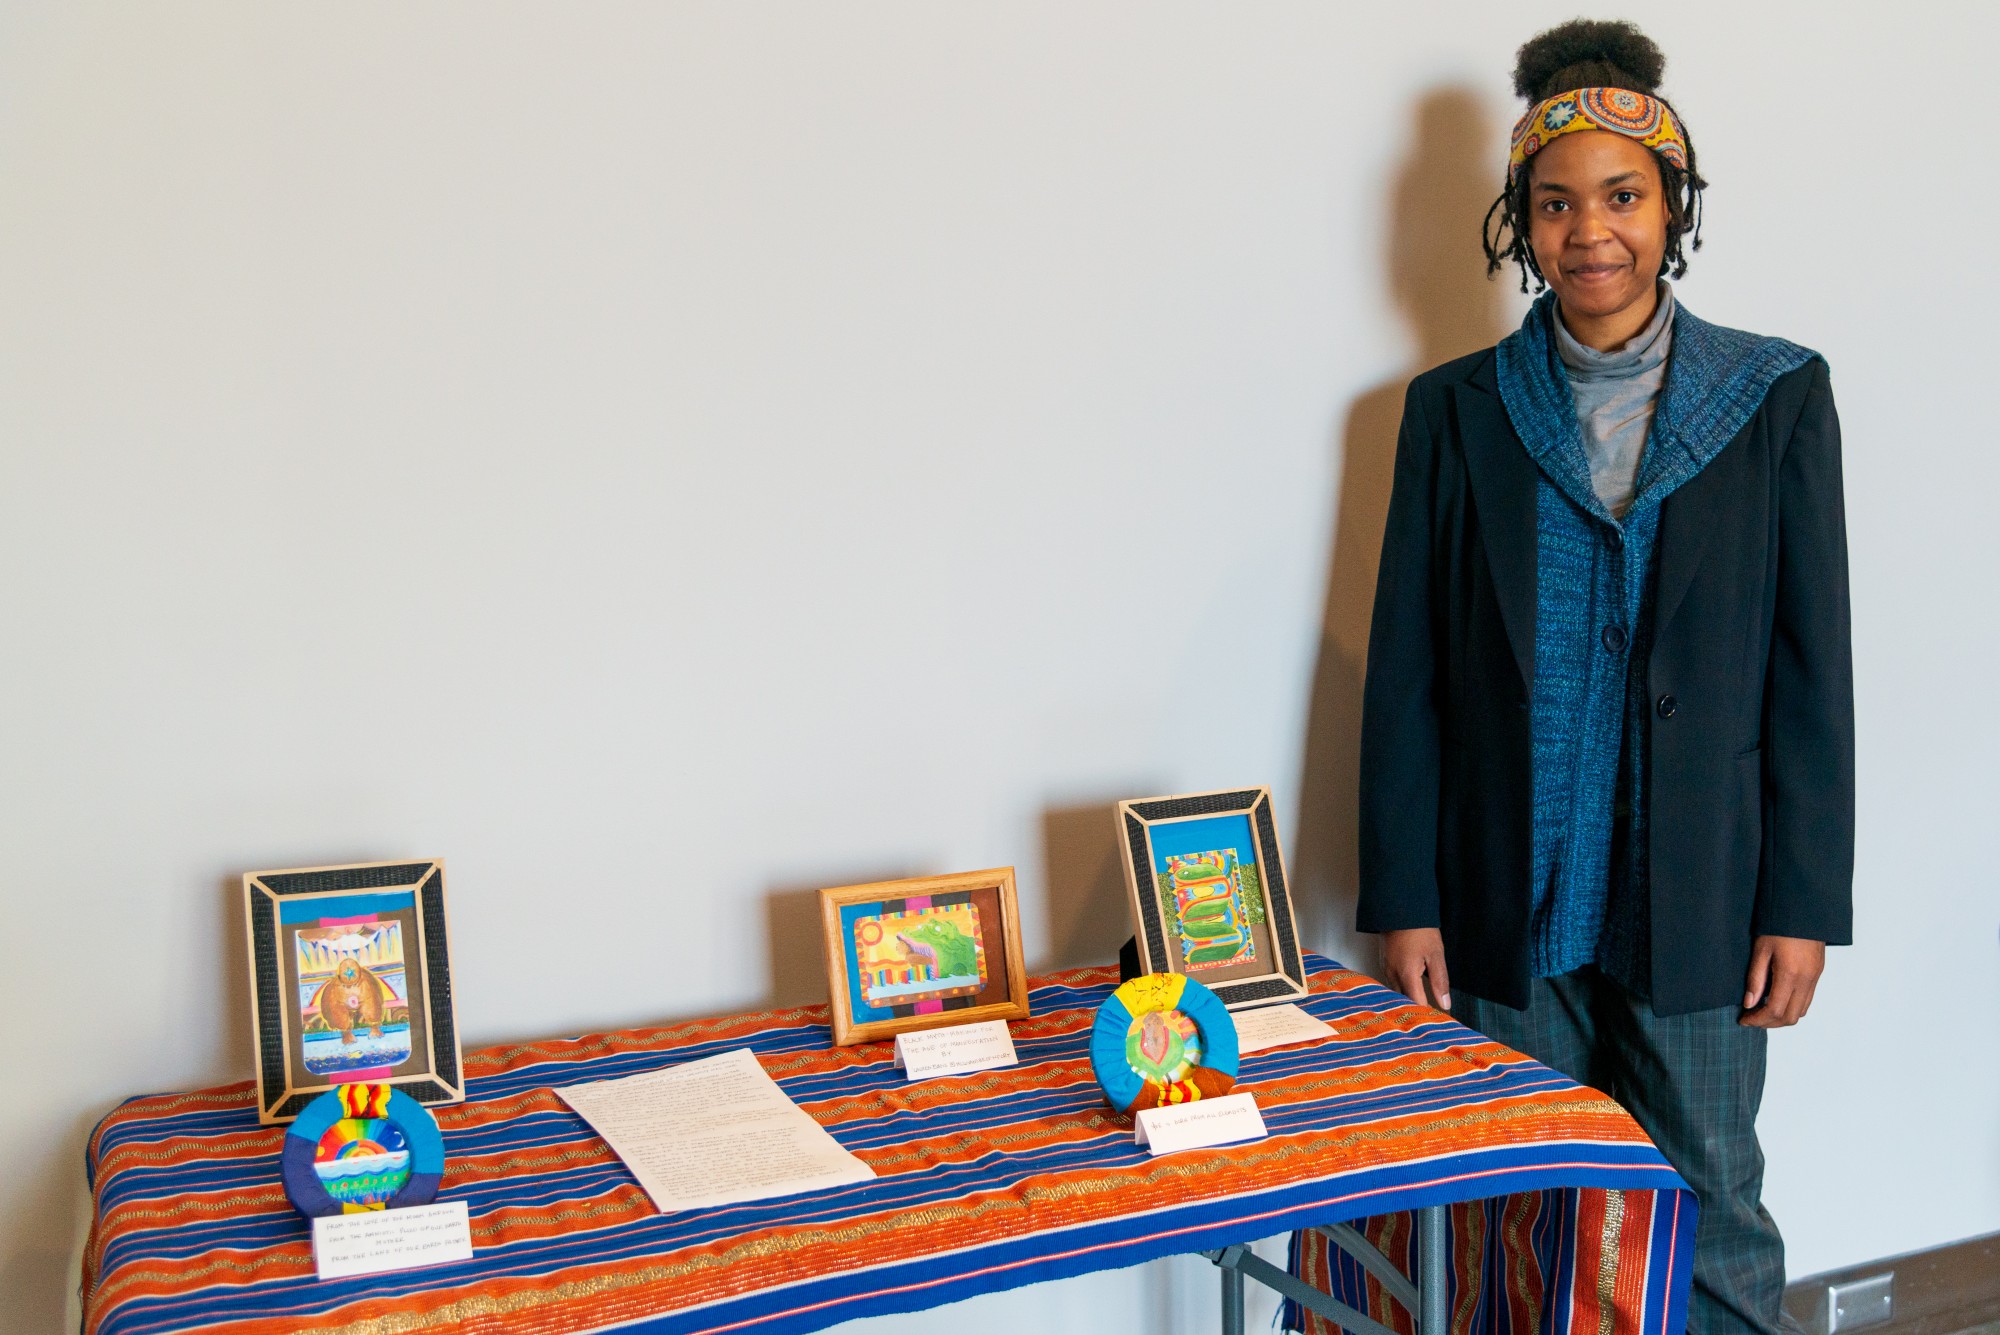 Artist Lauren Evans displays her art in Weisman Art Museum on Saturday, Feb. 15. Yo Mama’s House, an artist, activist and healer cooperative, is celebrating Black History Month and Women’s History Month with this pop-up display. (Emily Urfer / Minnesota Daily)